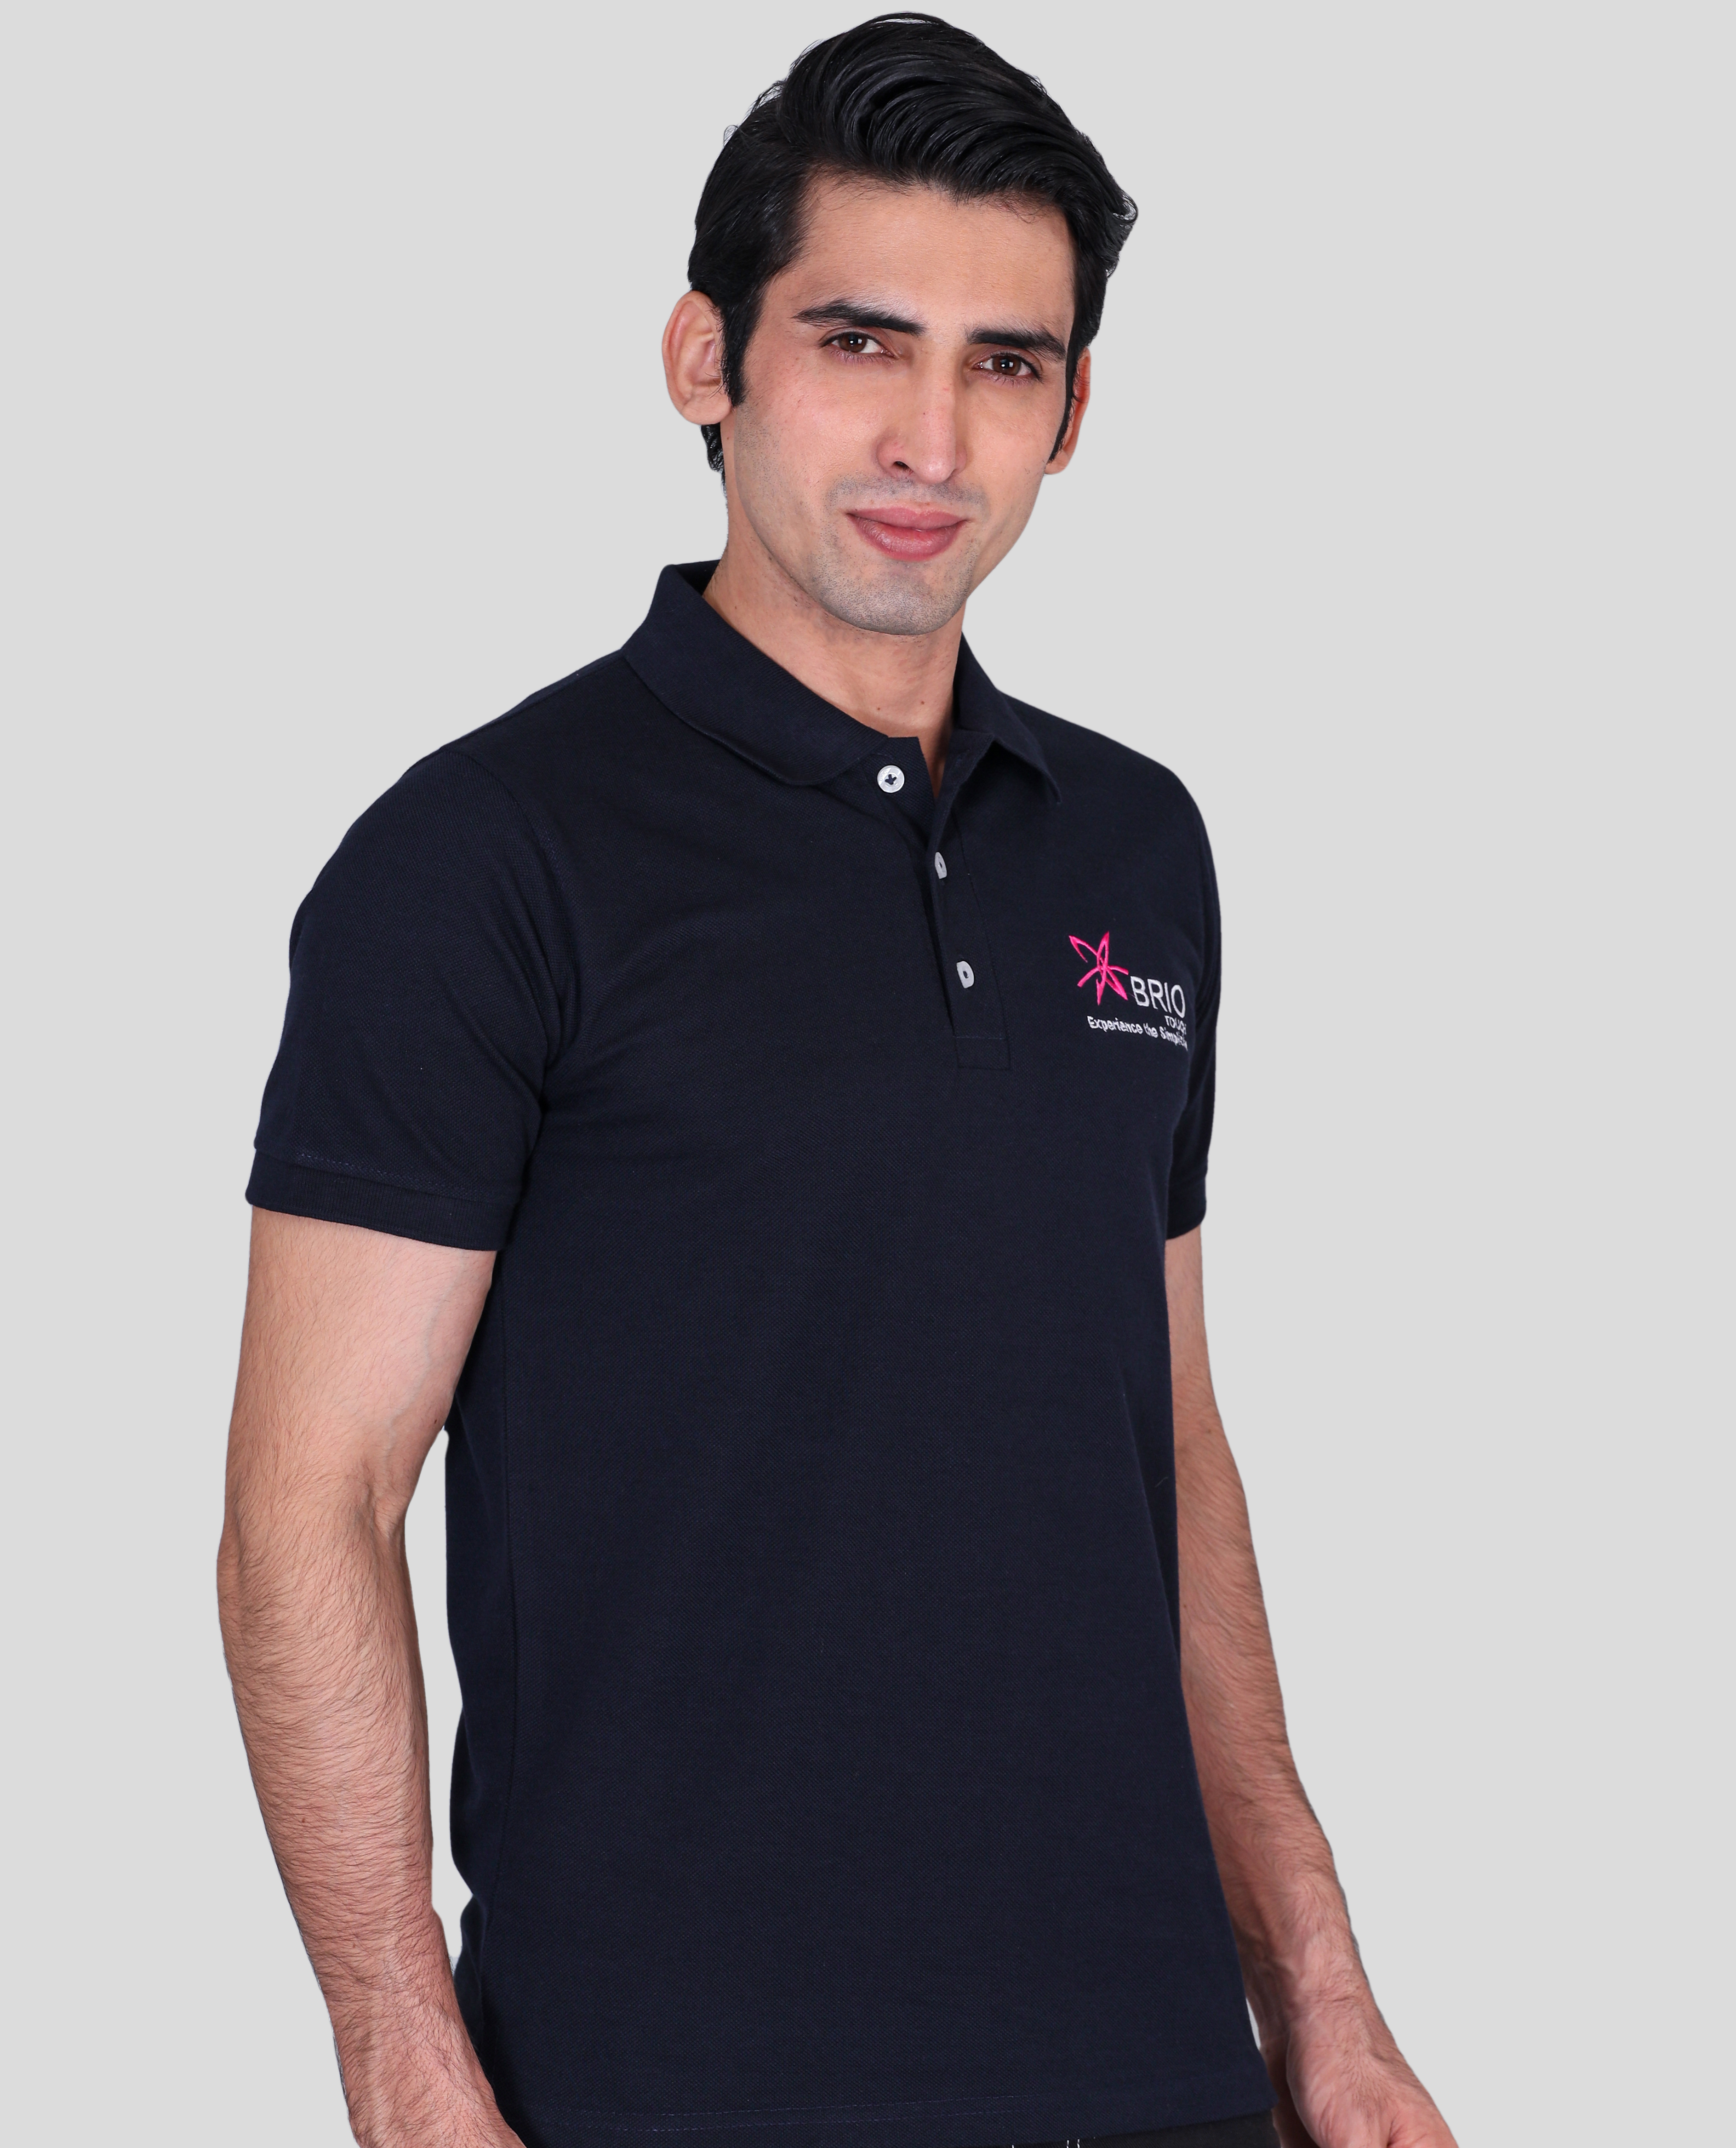 Brio black promotional polo t-shirts supplier 